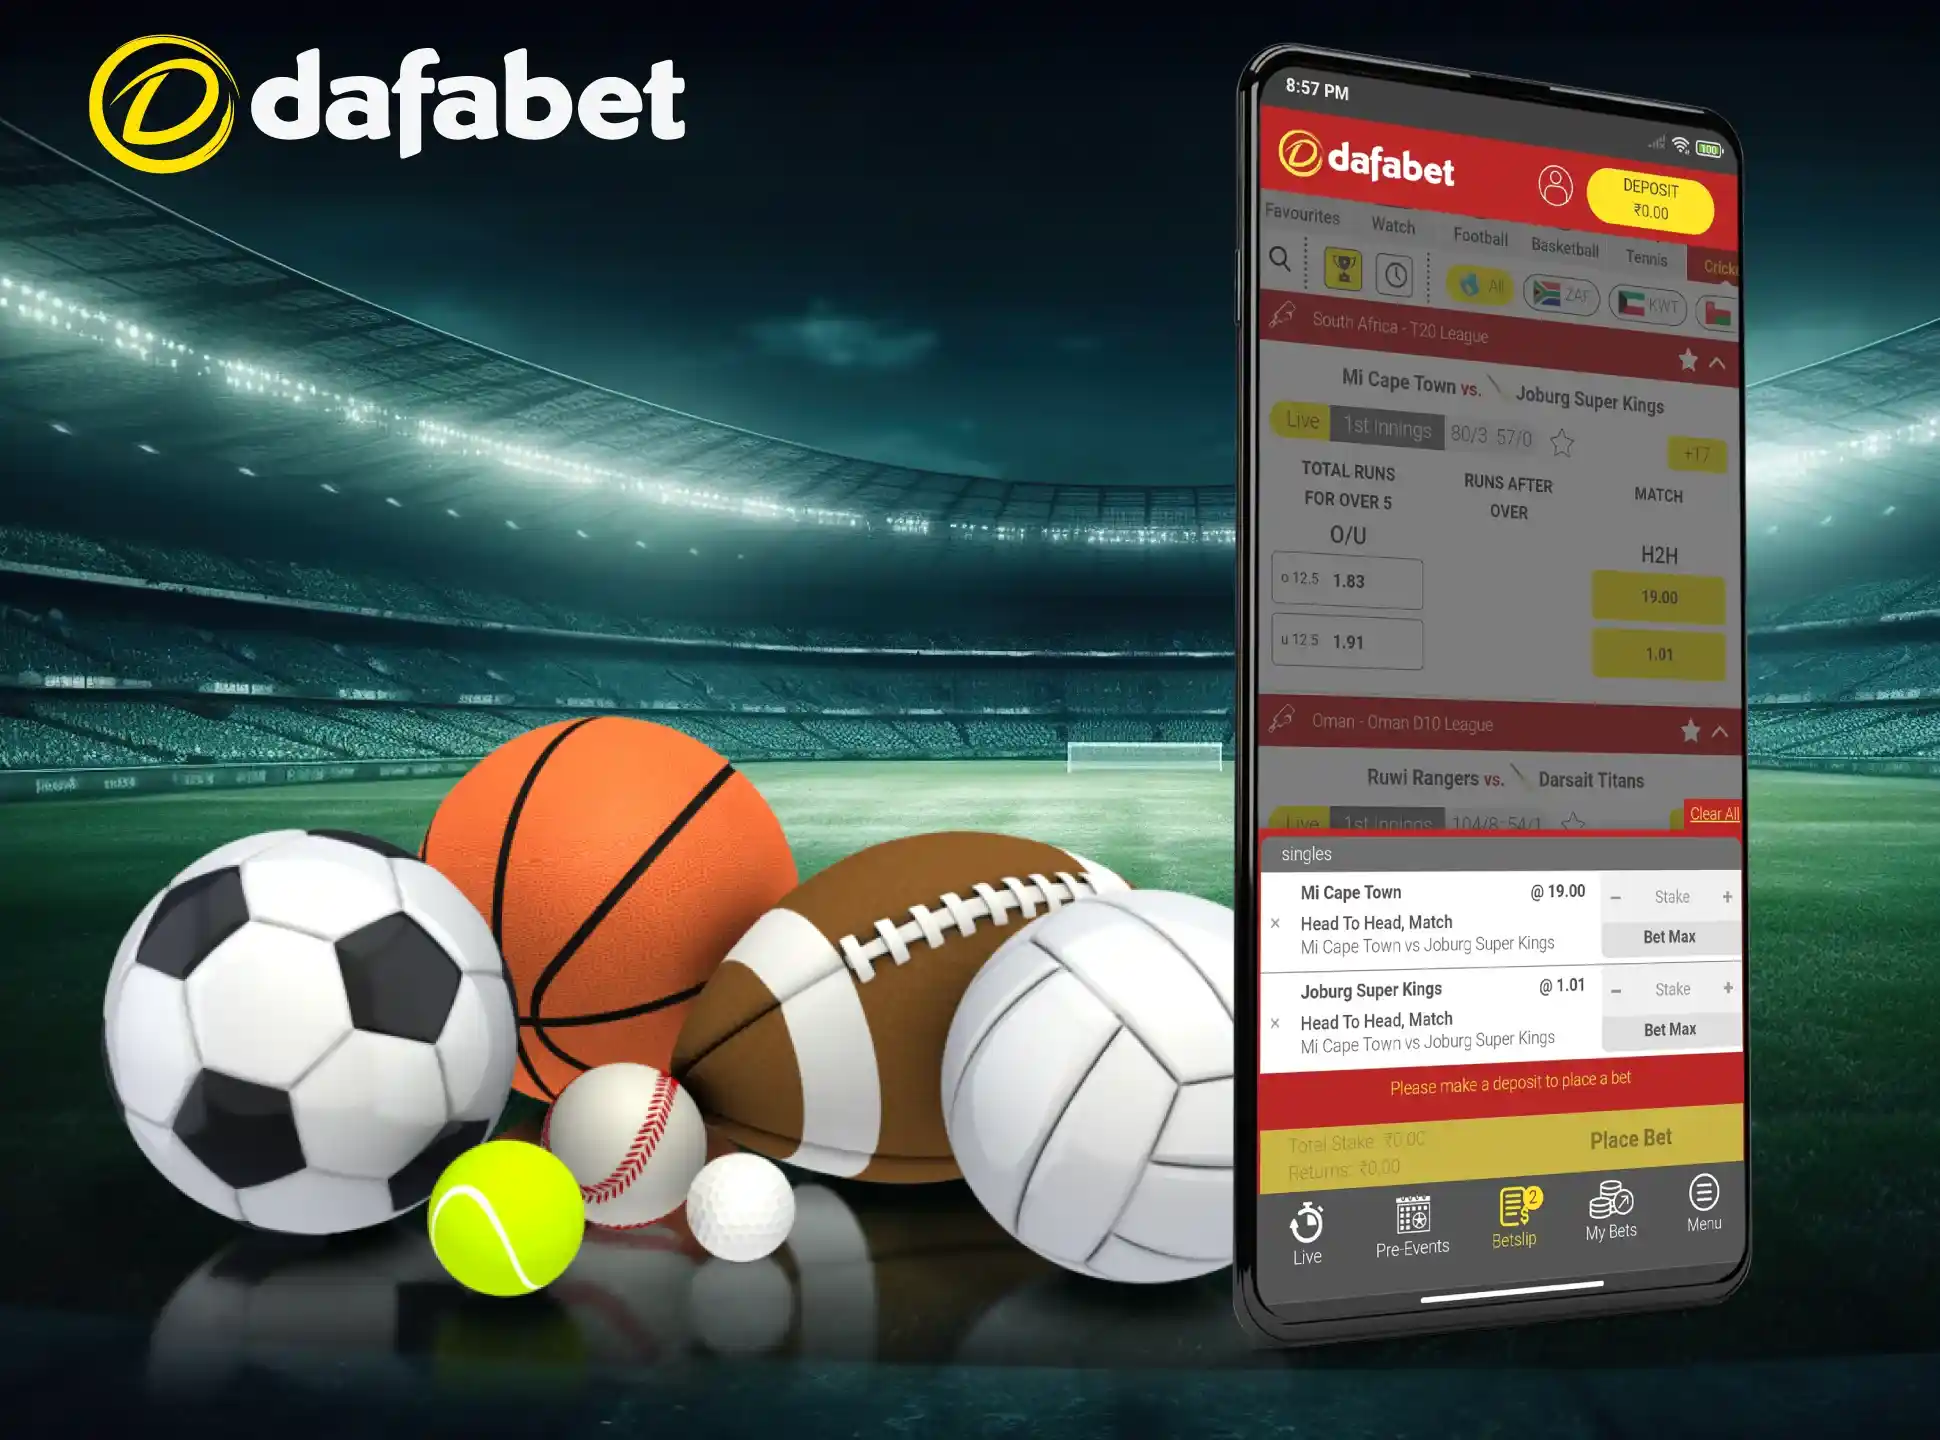 The Dafabet app has three types of bets.